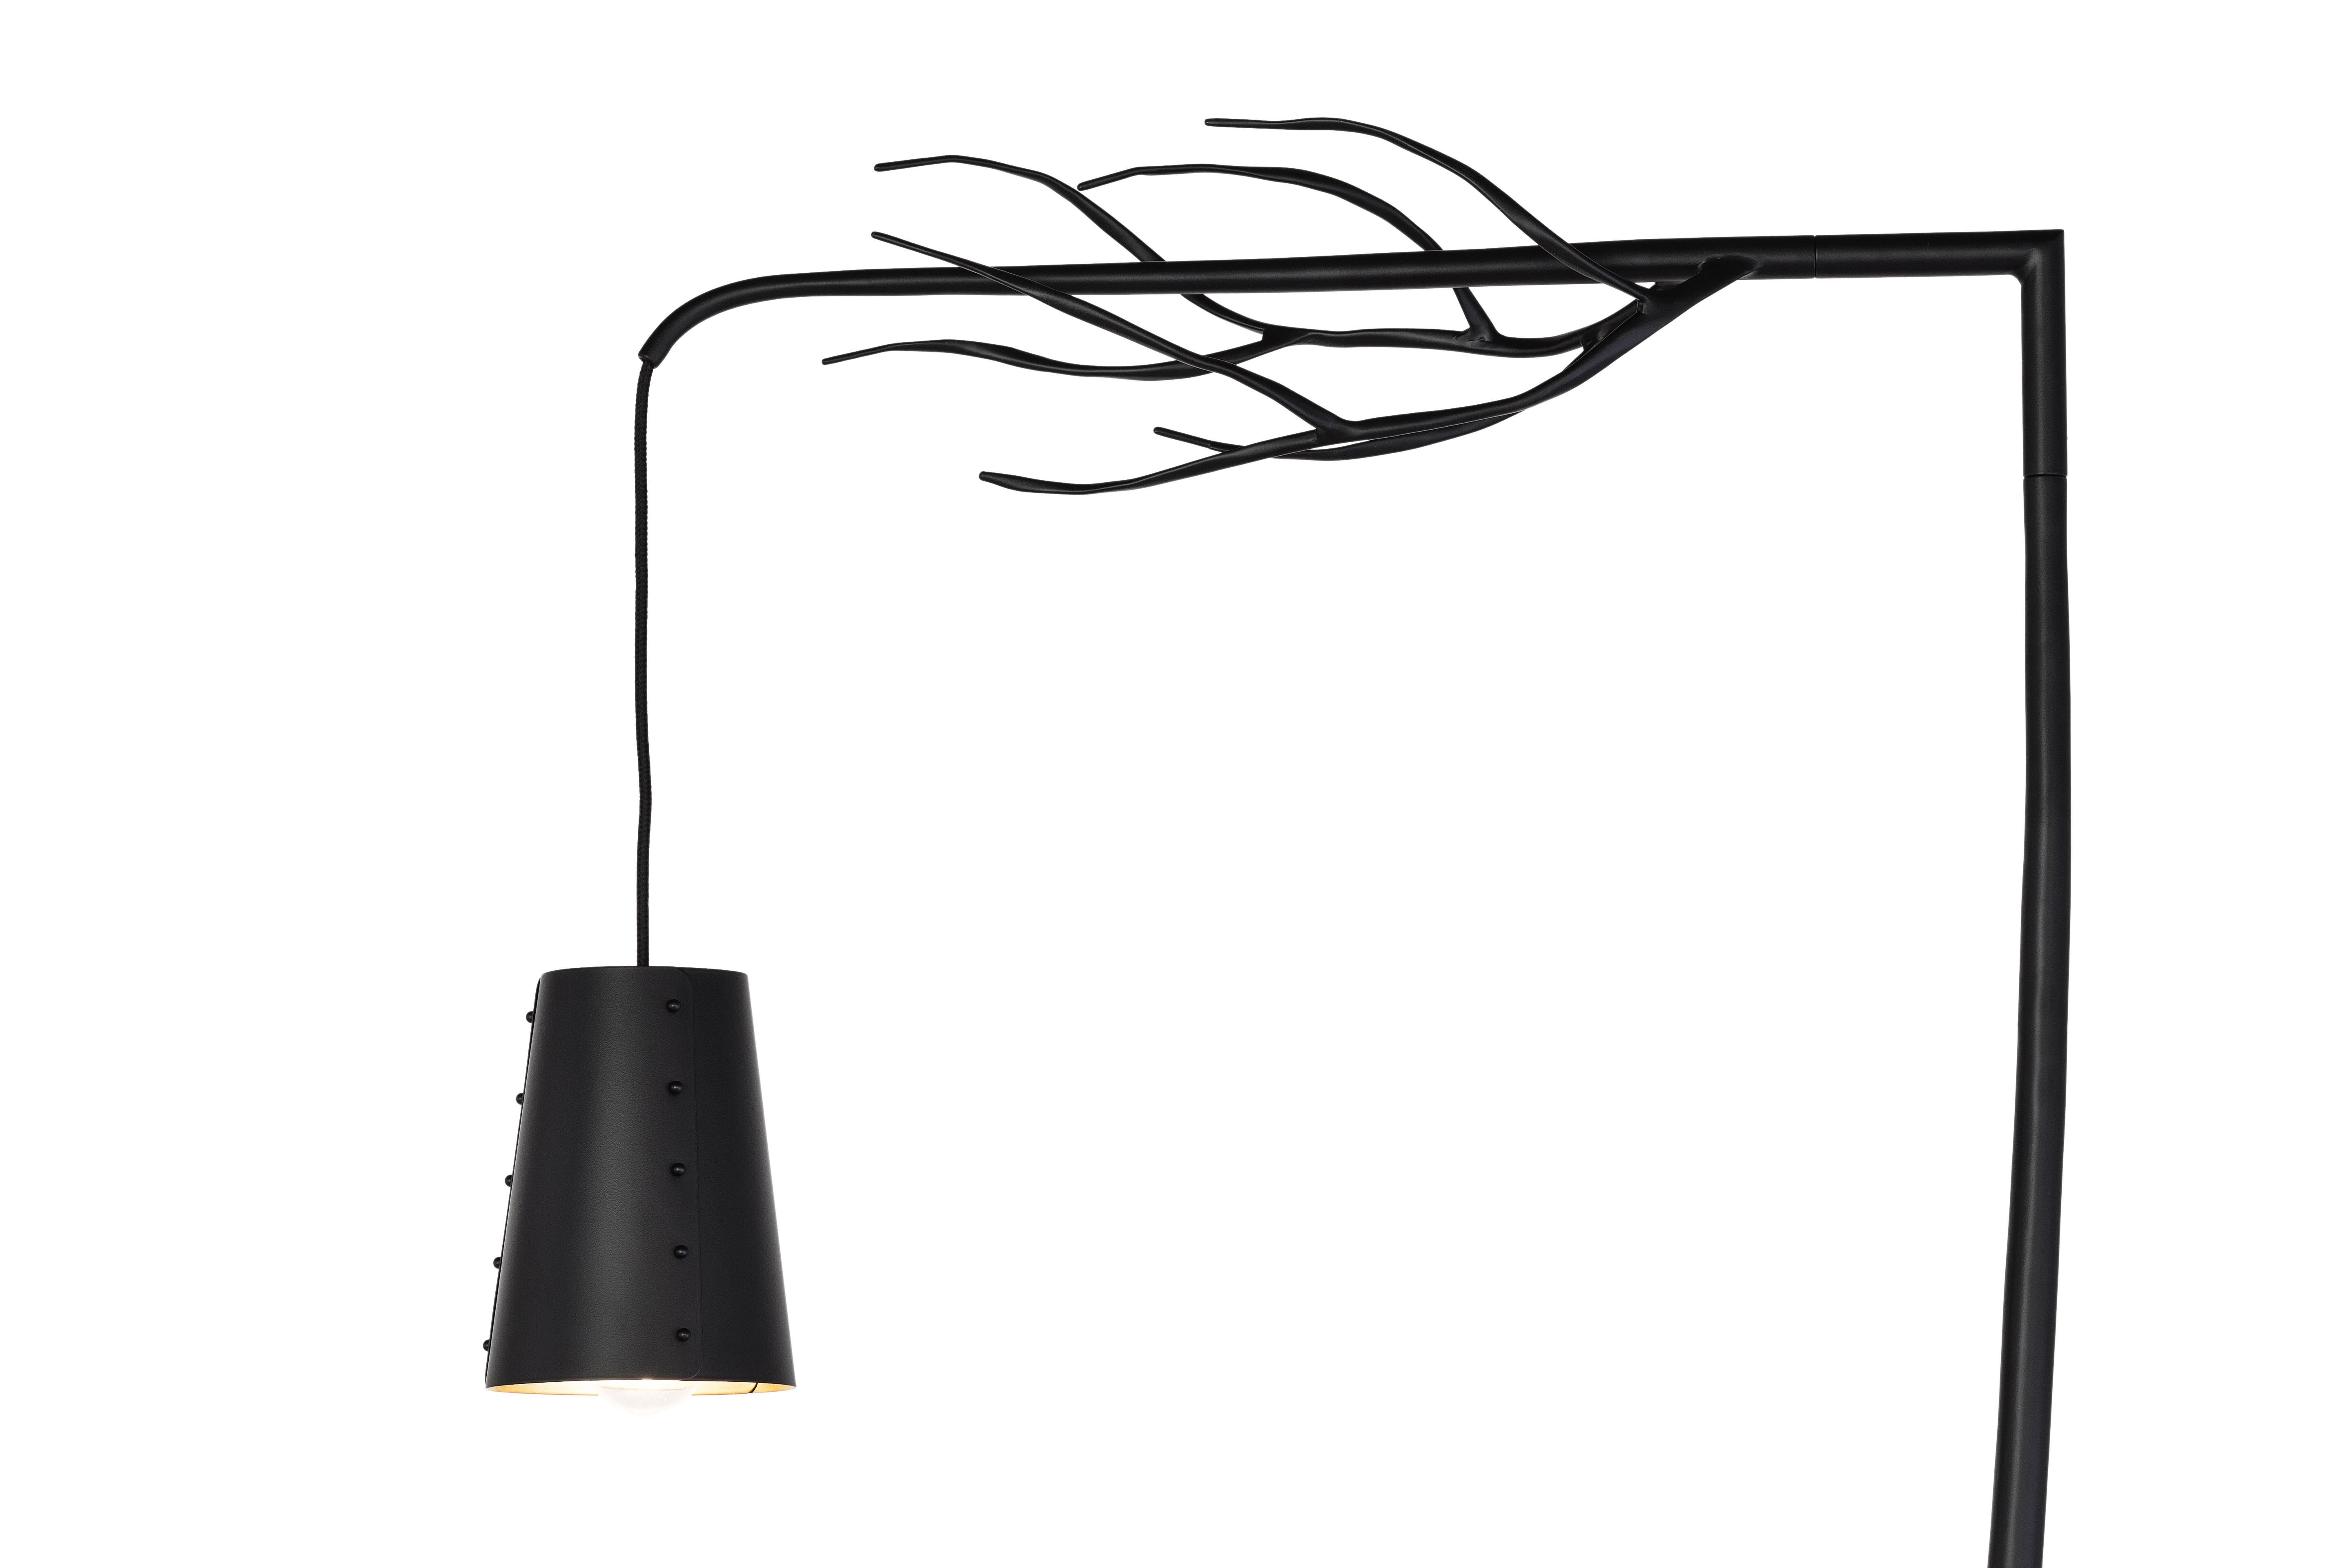 The Flintstone is a modern floor lamp in a black matt finish designed by Wiliam Brand of Brand van Egmond. 

Retracing our steps through the millennia to the beginning of times, we find ourselves back at the fireplace in the prehistoric cave. Here